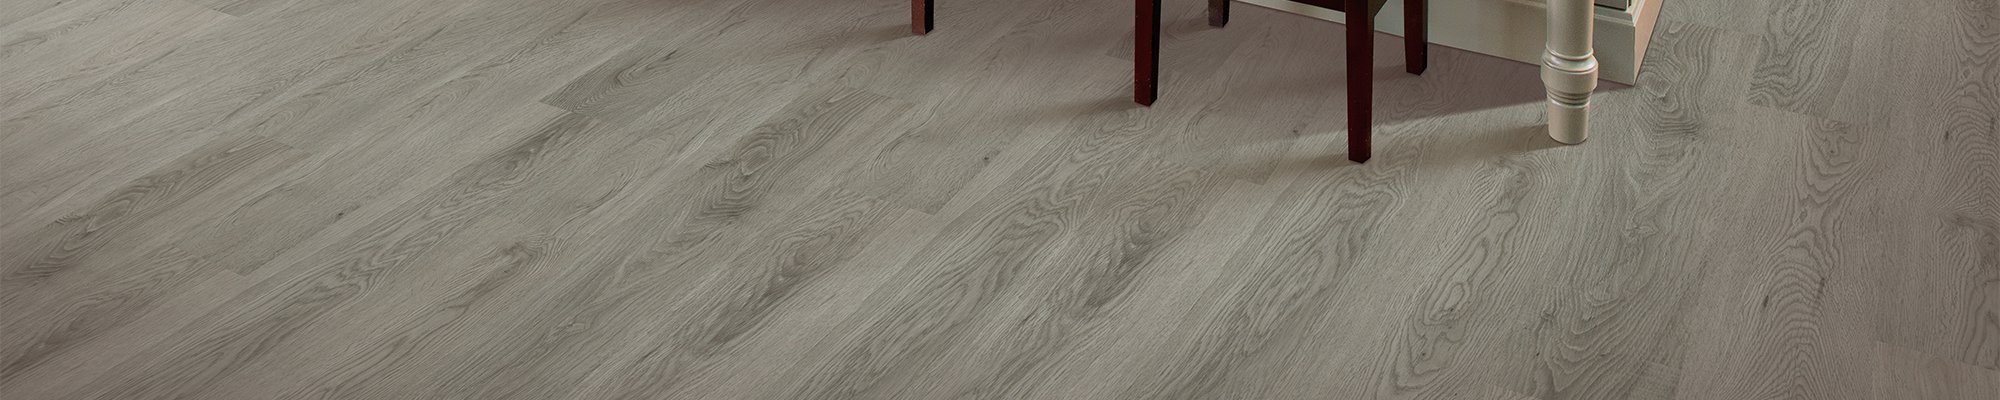 Floors USA carries a large selection of vinyl flooring and for good reasons.